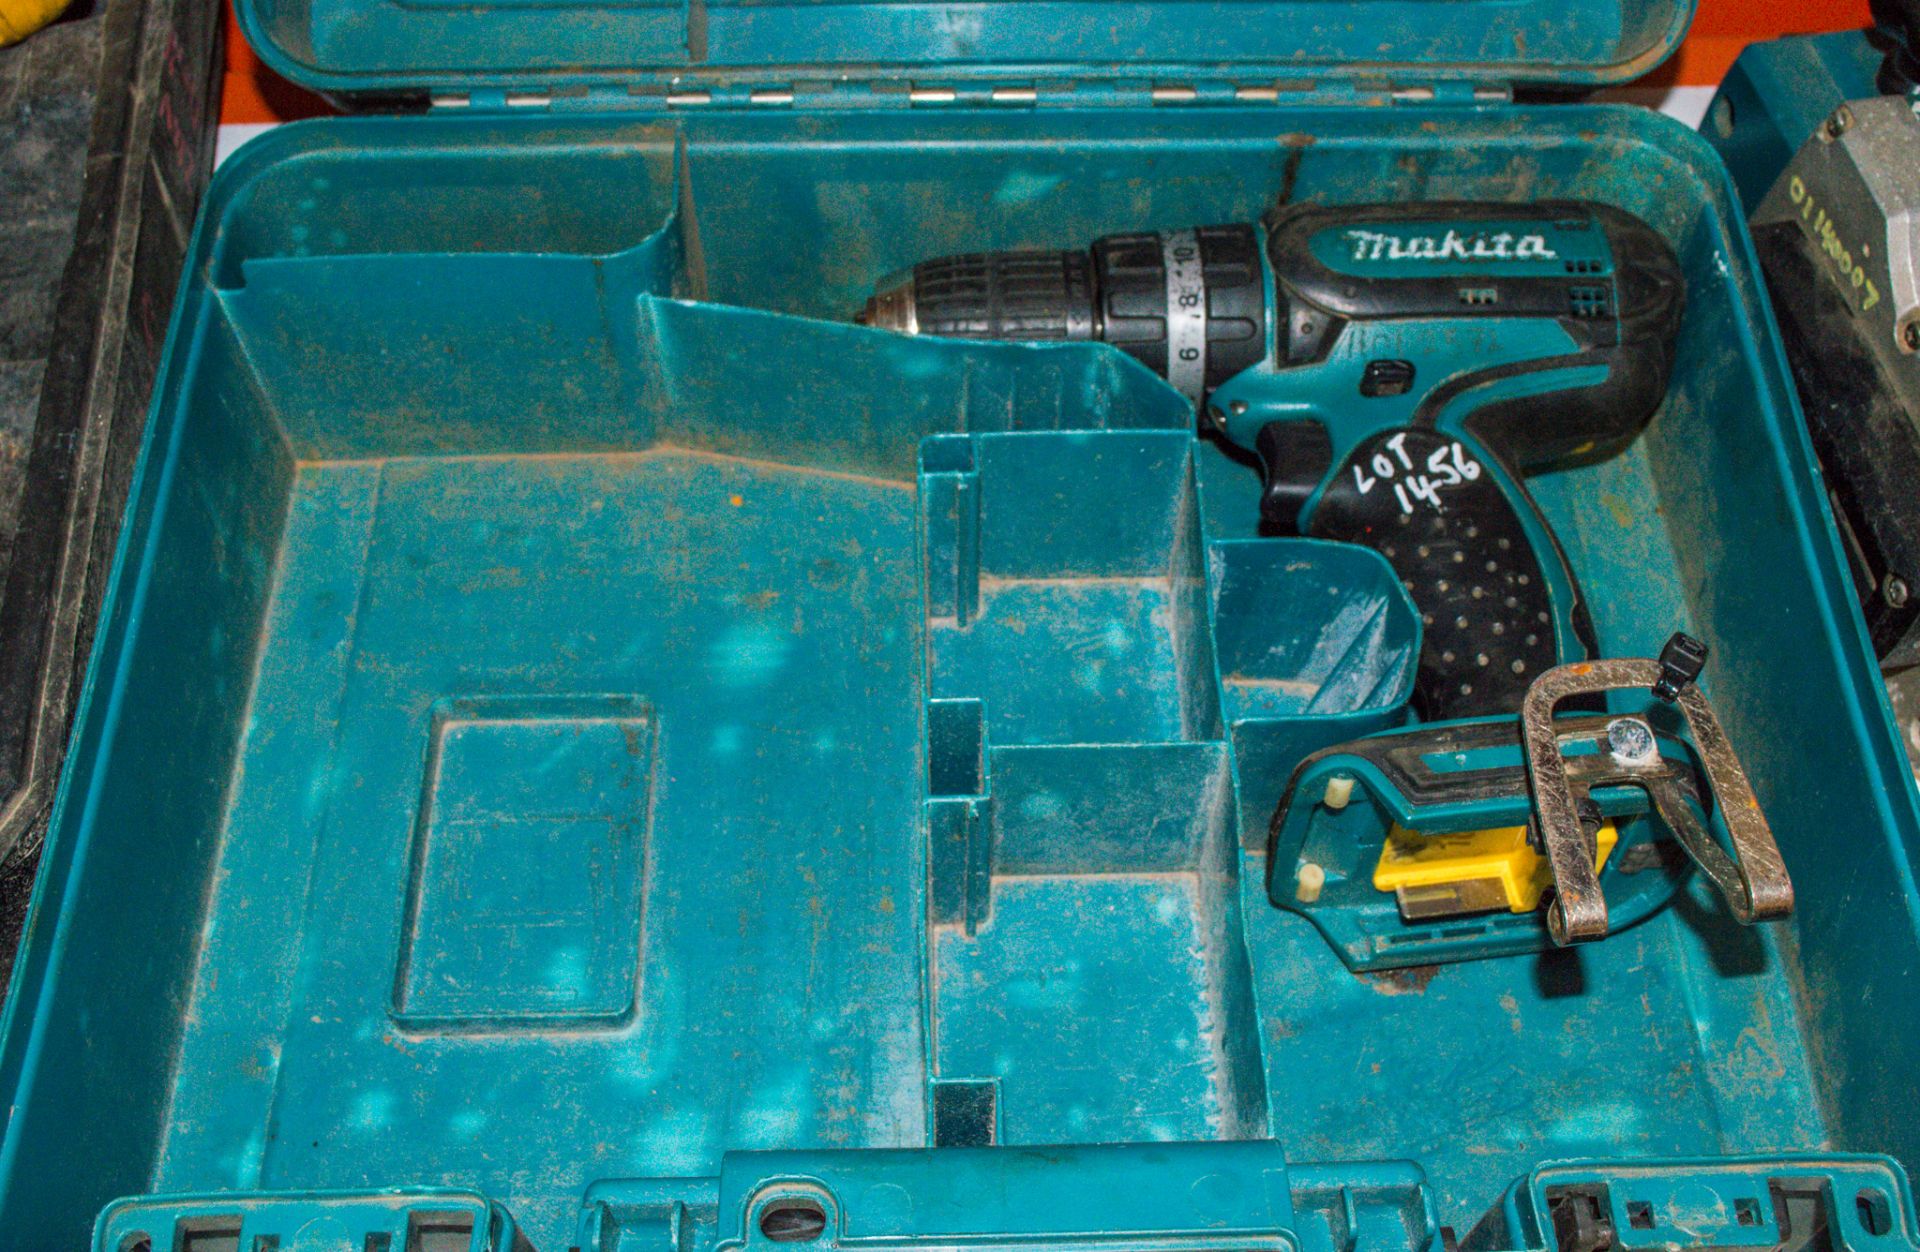 Makita BHP452 18v cordless power drill c/w carry case ** No charger